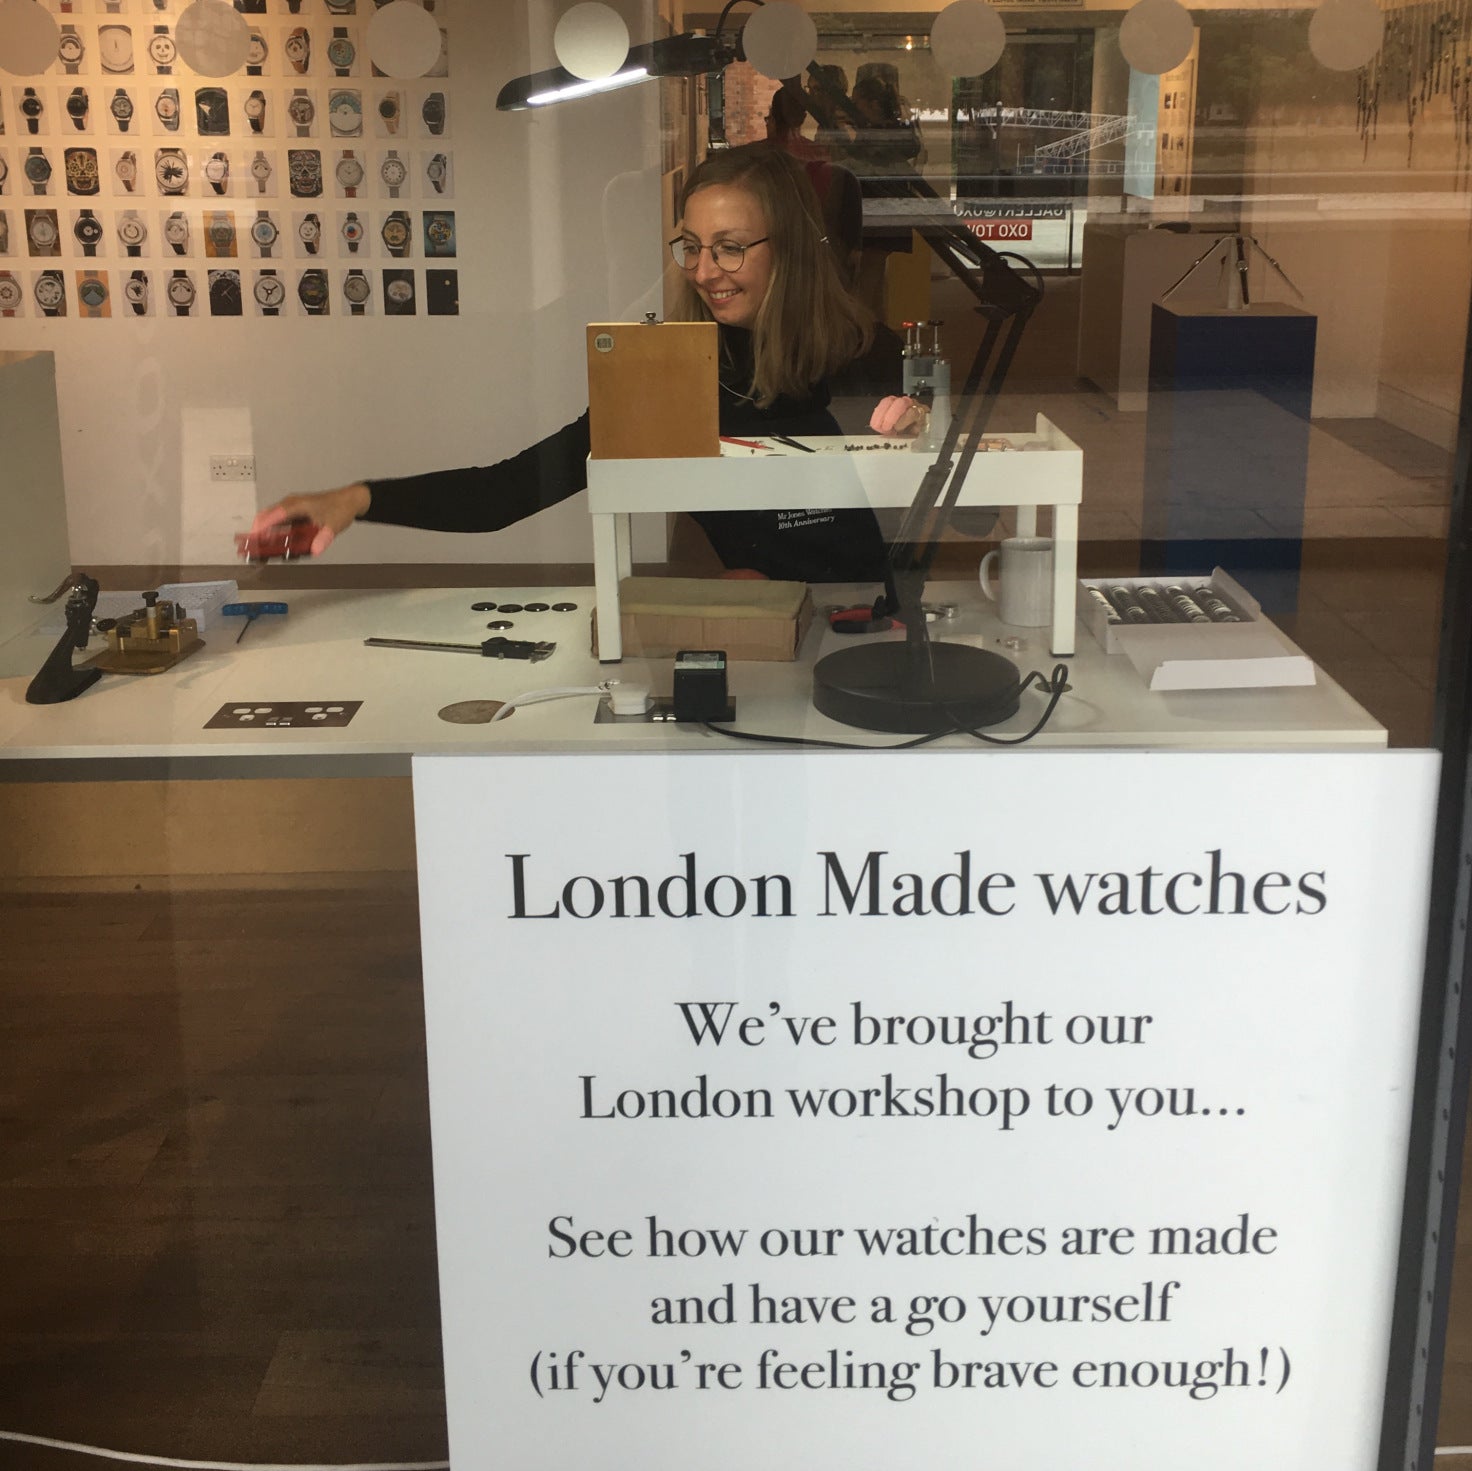 View from the outside window of the exhibition: Dovile assembling watches